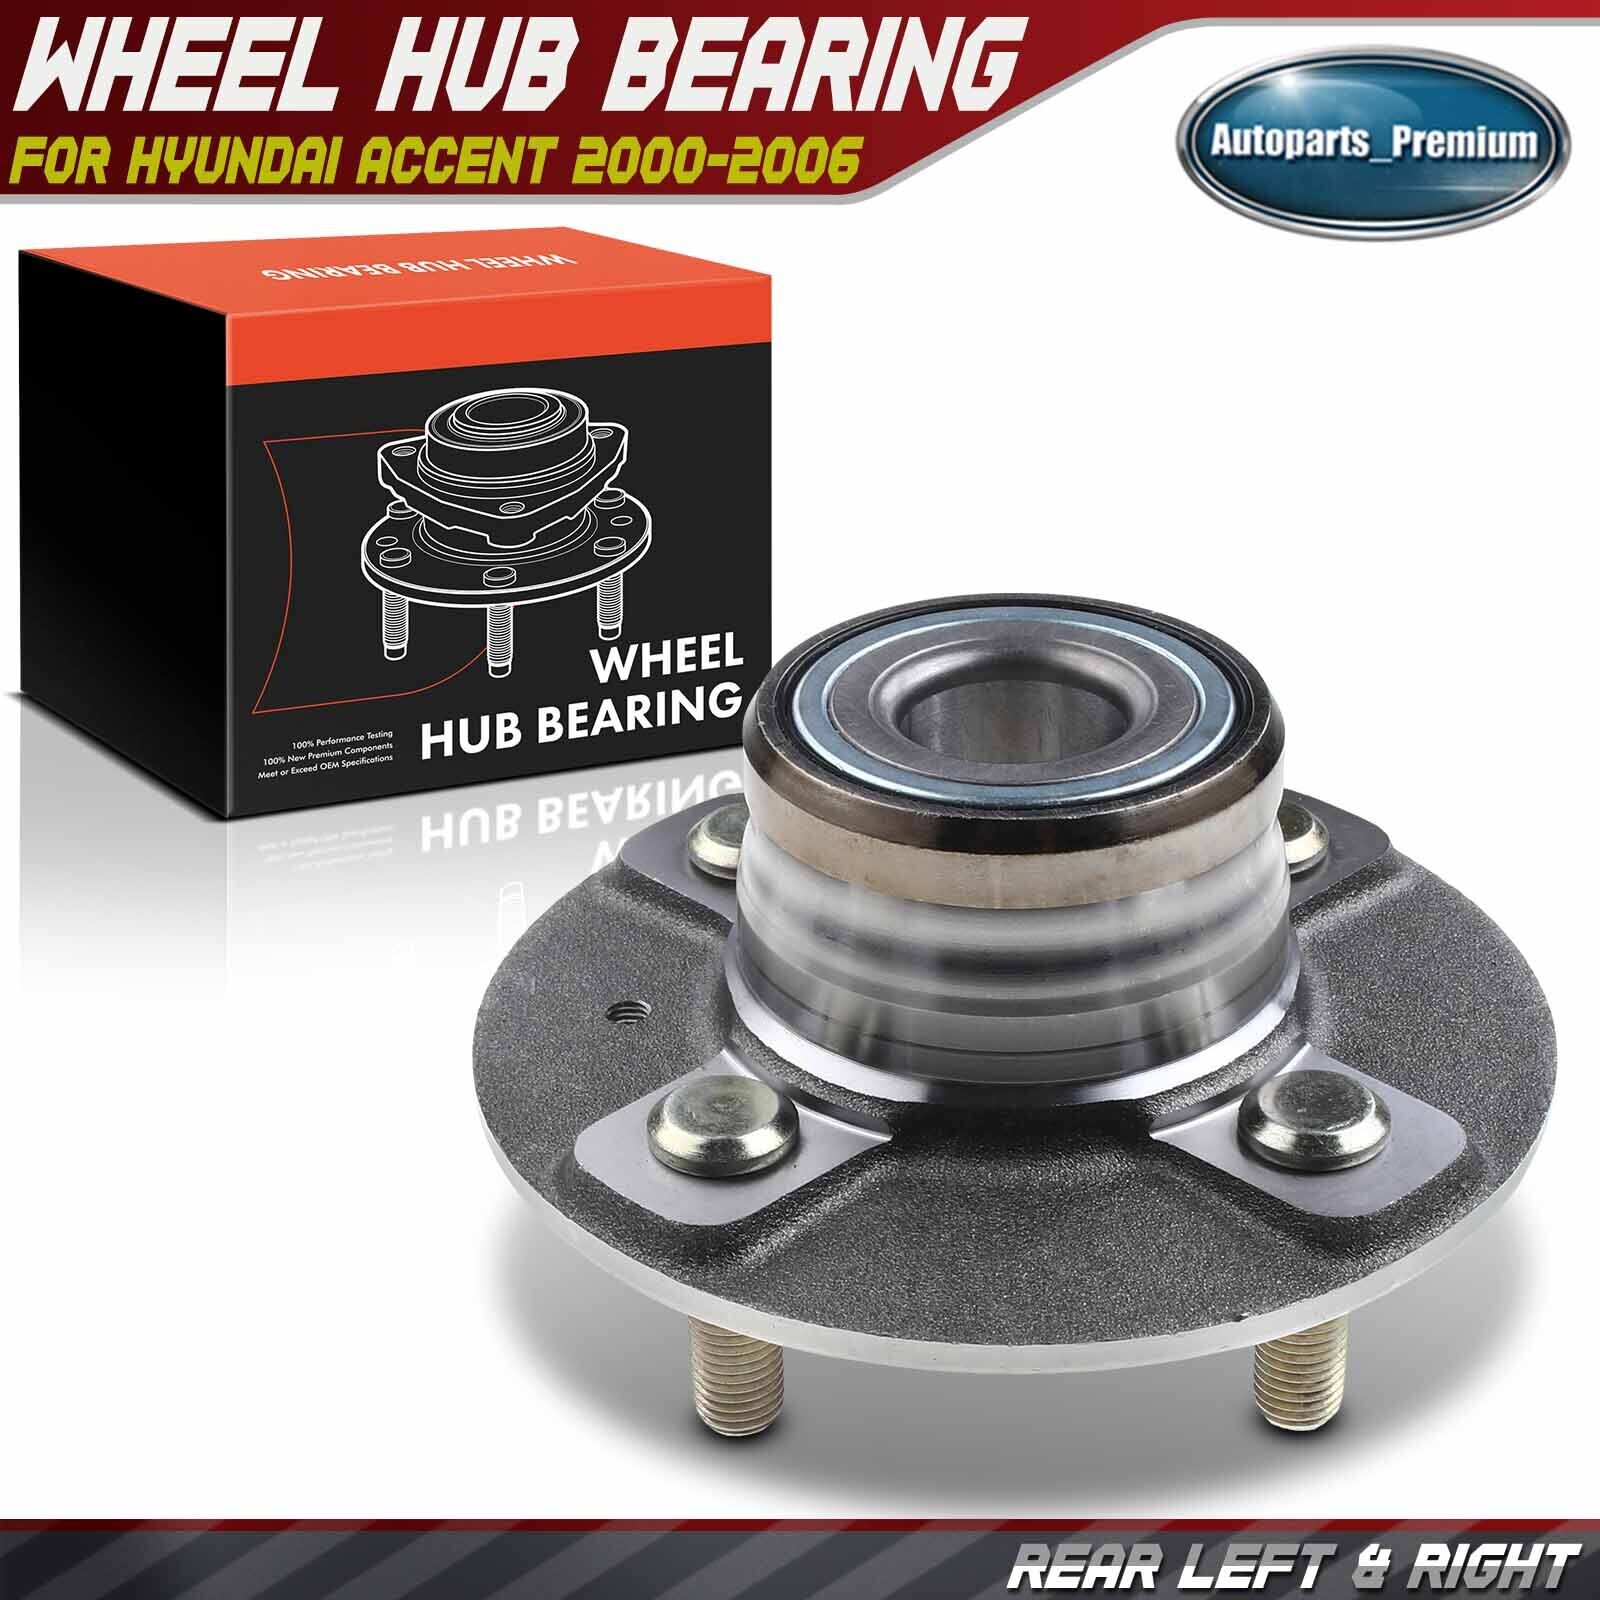 New Rear Left or Right Wheel Hub Bearing Assembly for Hyundai Accent 2000-2006